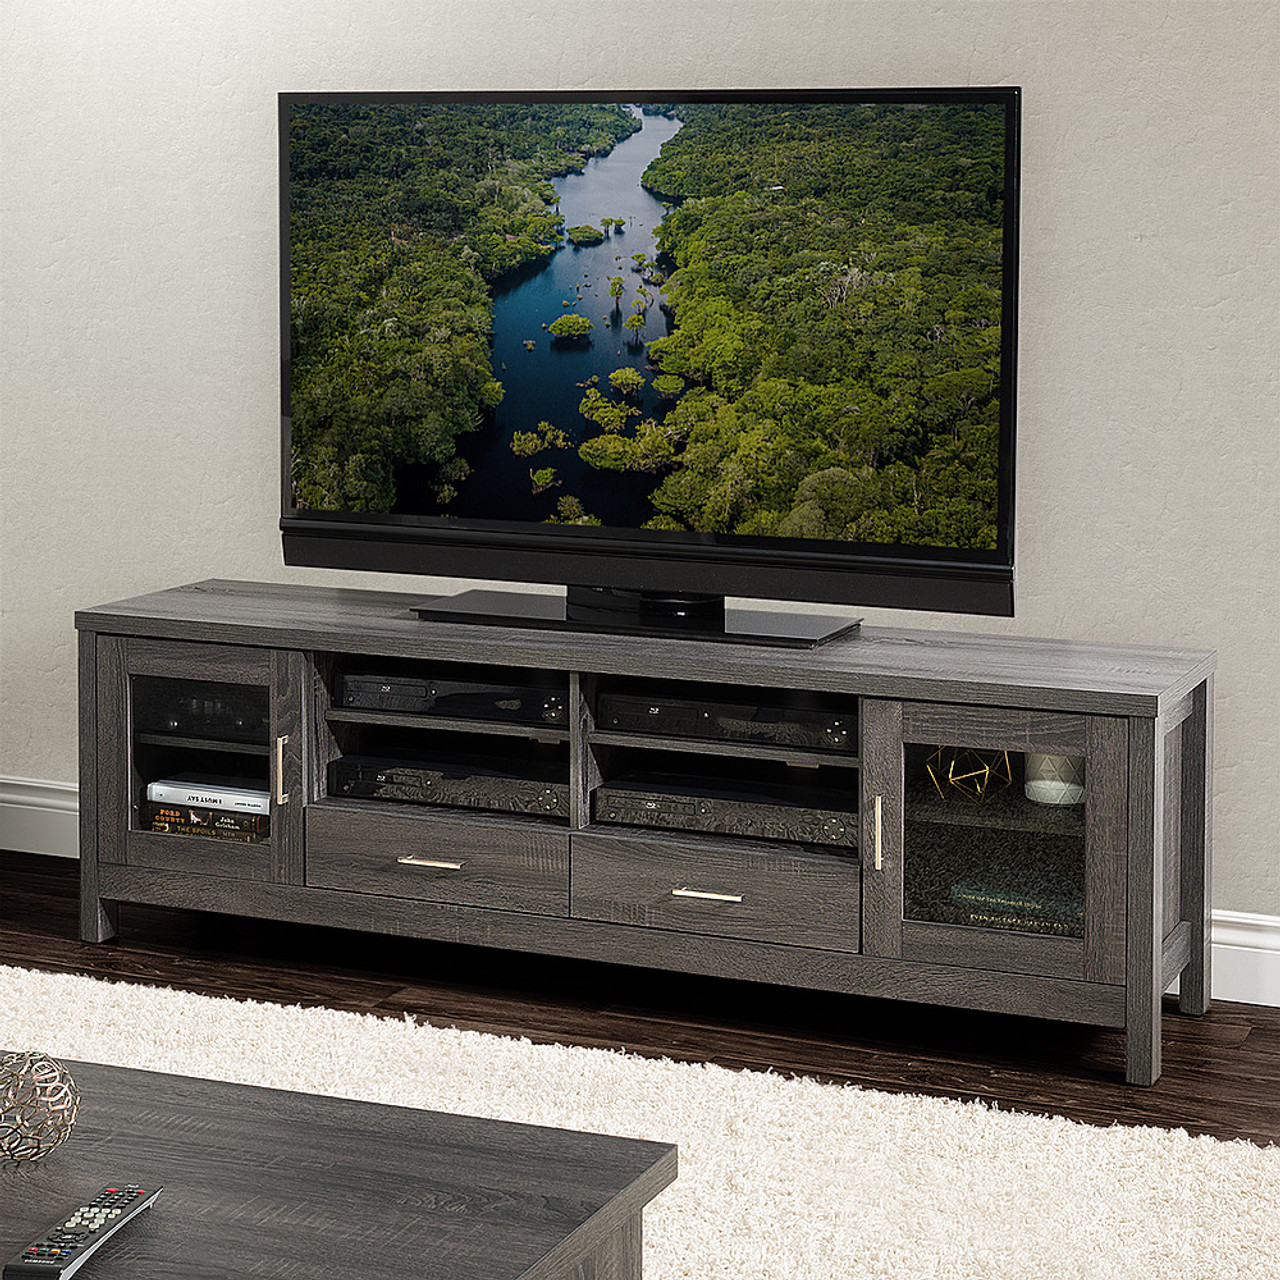 CorLiving - Hollywood Wood TV Cabinet, for TVs up to 80" - Ash Grey